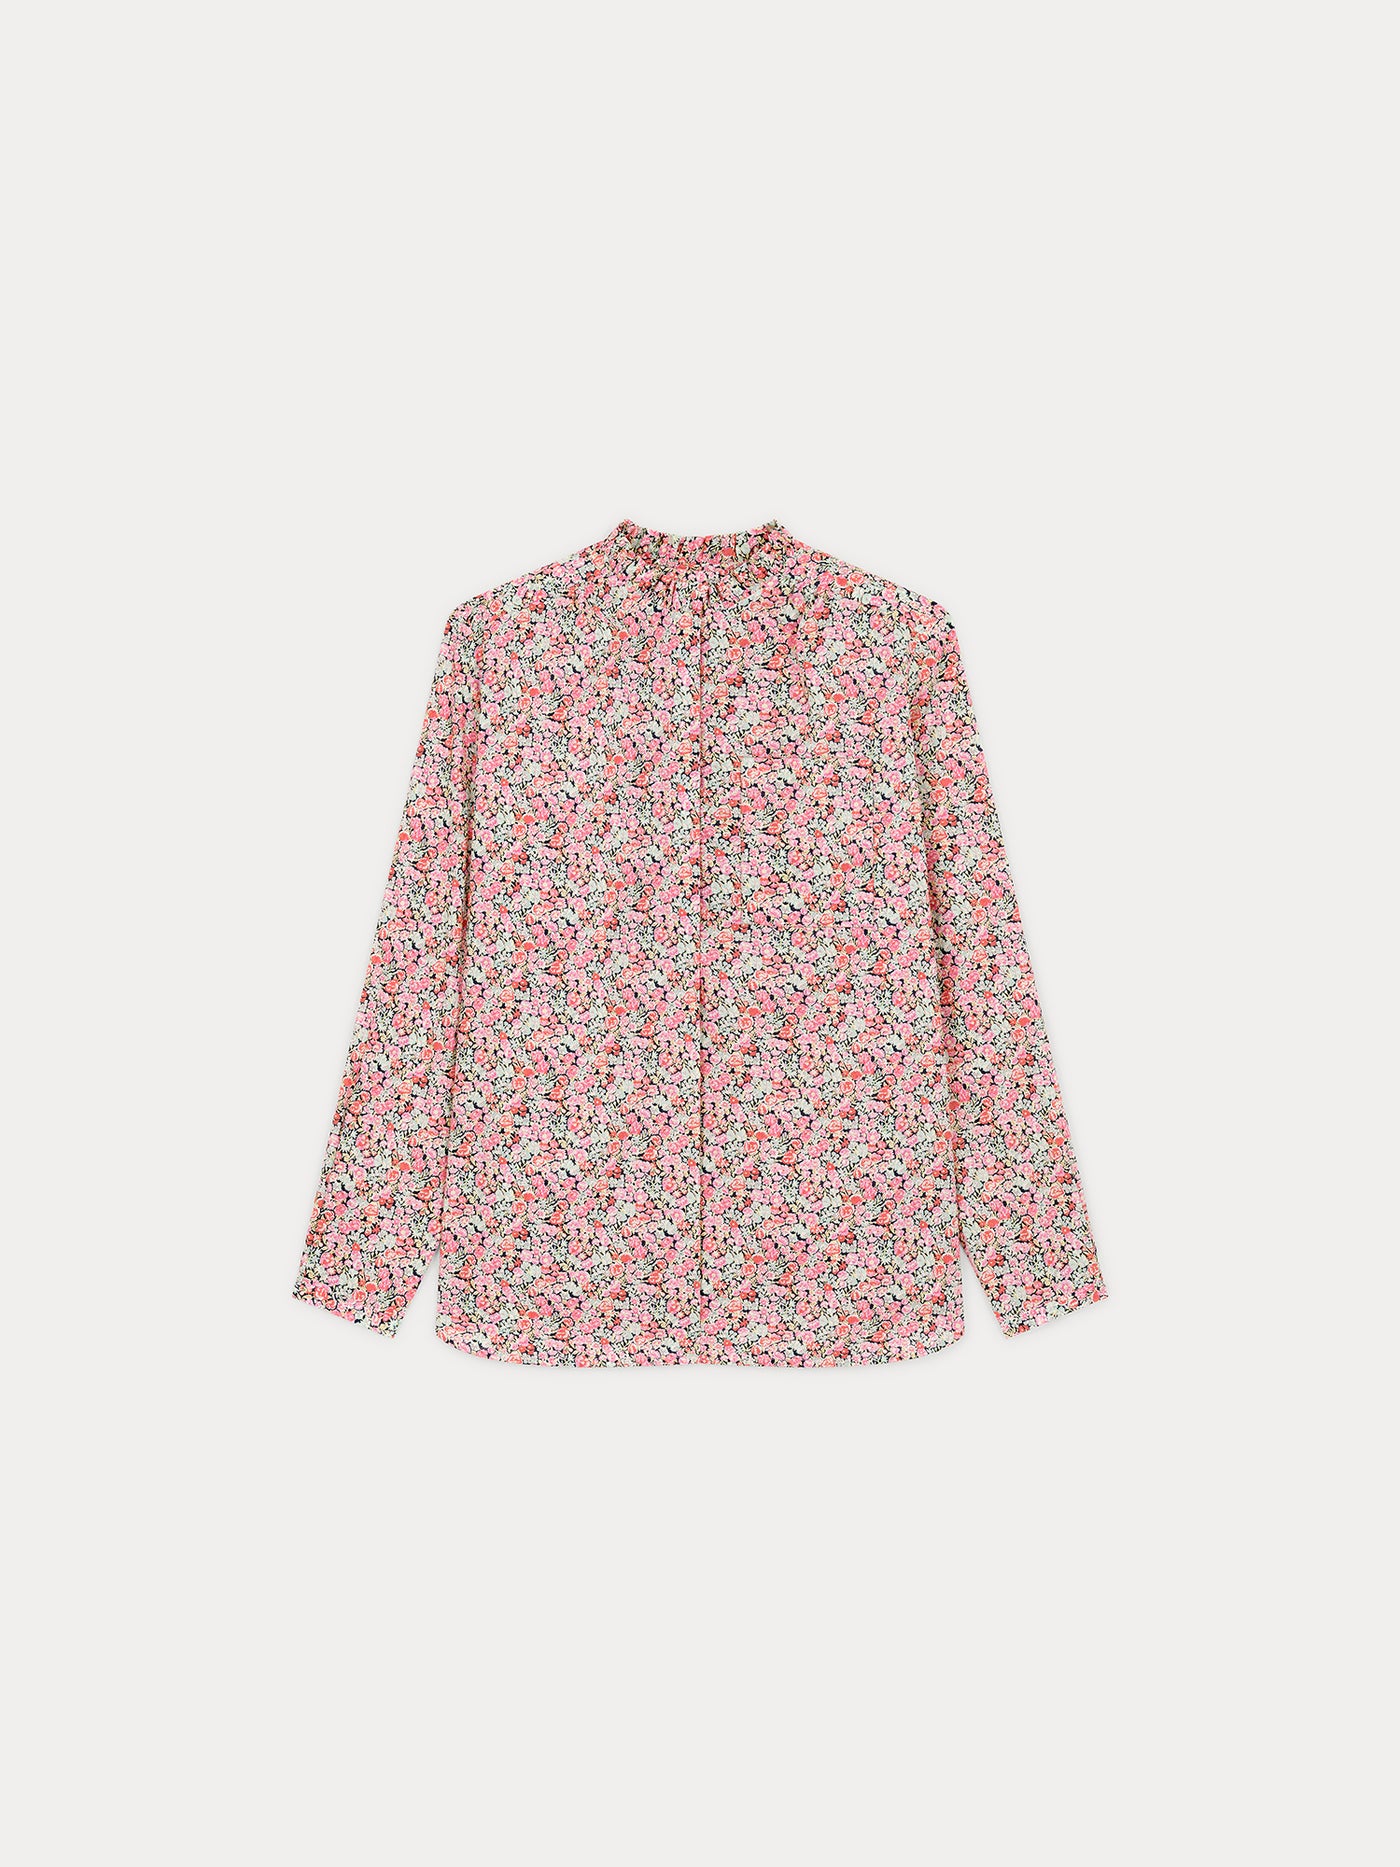 Shirt in exclusive Liberty fabric in printed cotton poplin